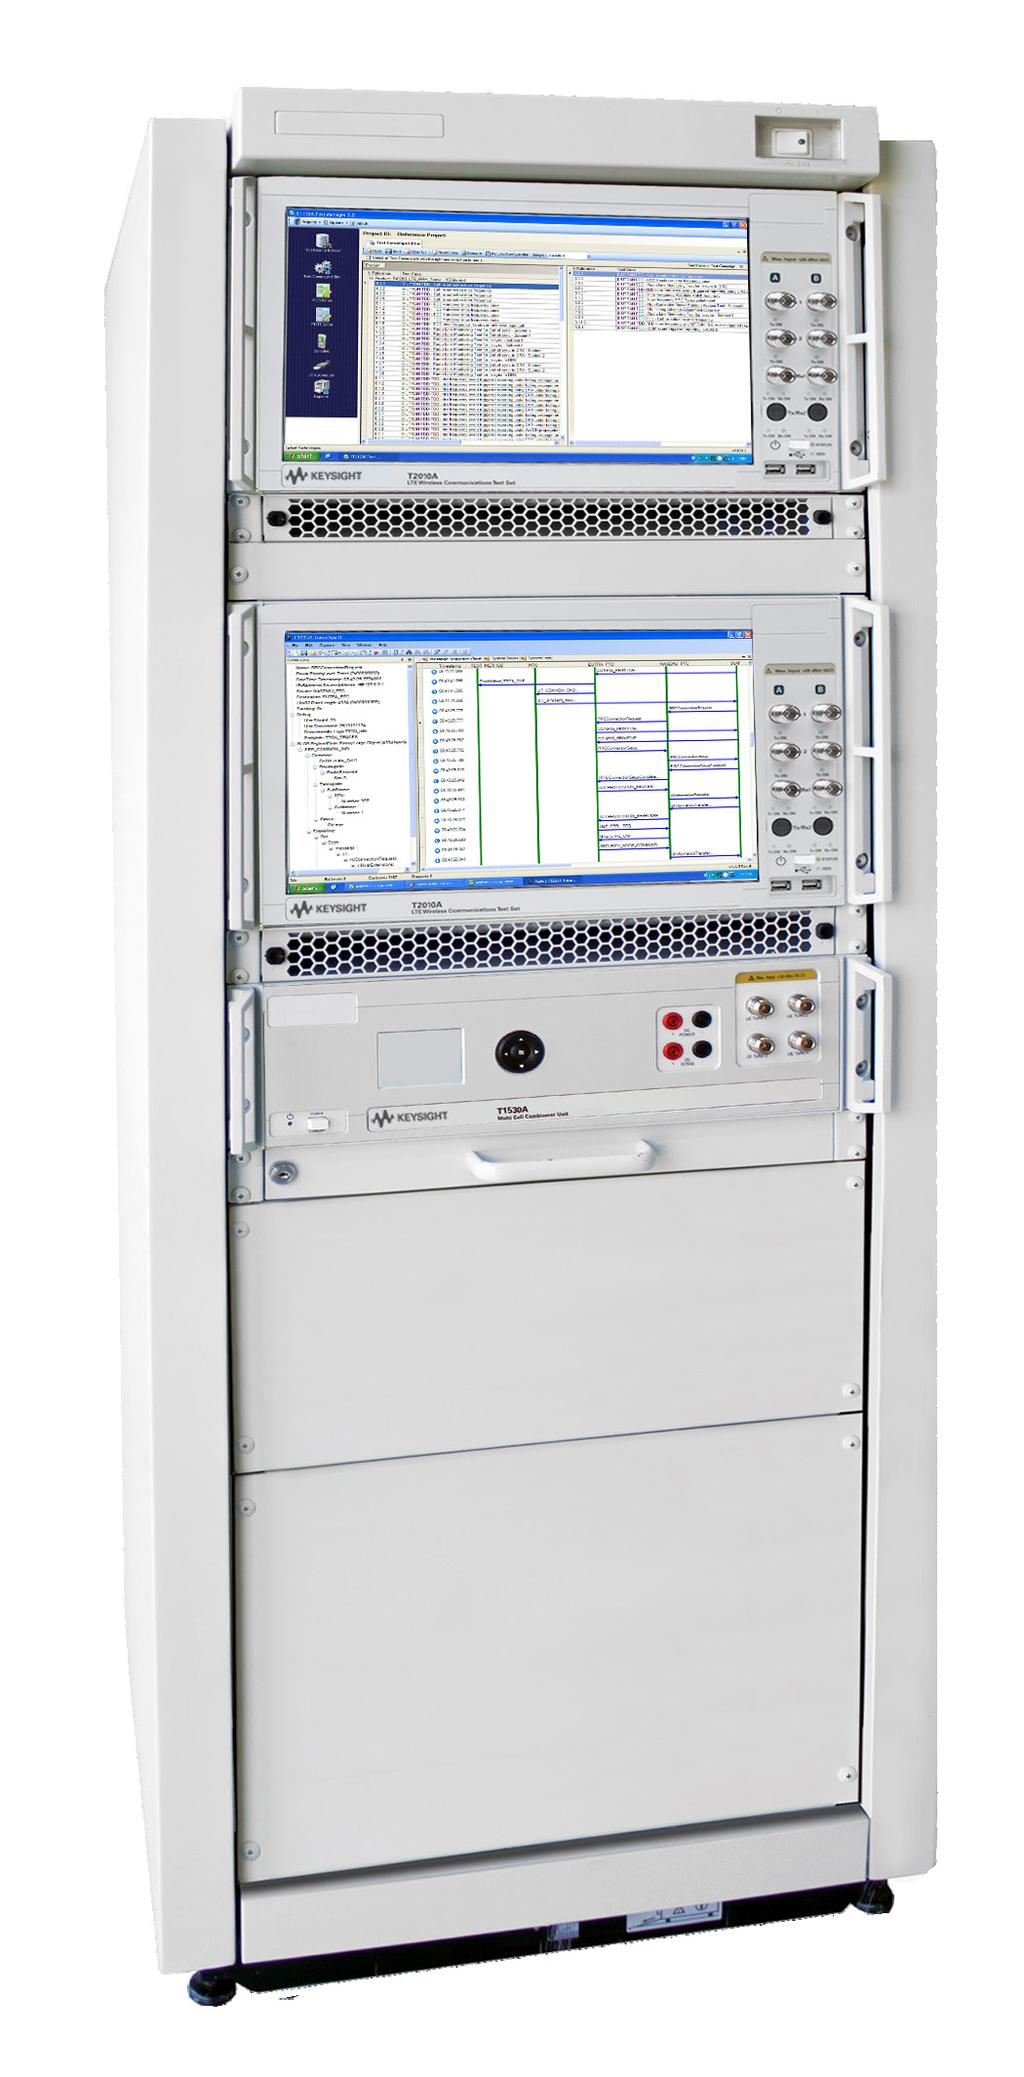 05 Keysight T4020S LTE RRM Test System - Technical Overview System Components The Keysight T4020S family of LTE RRM testers covers three distinct hardware configurations depending on the